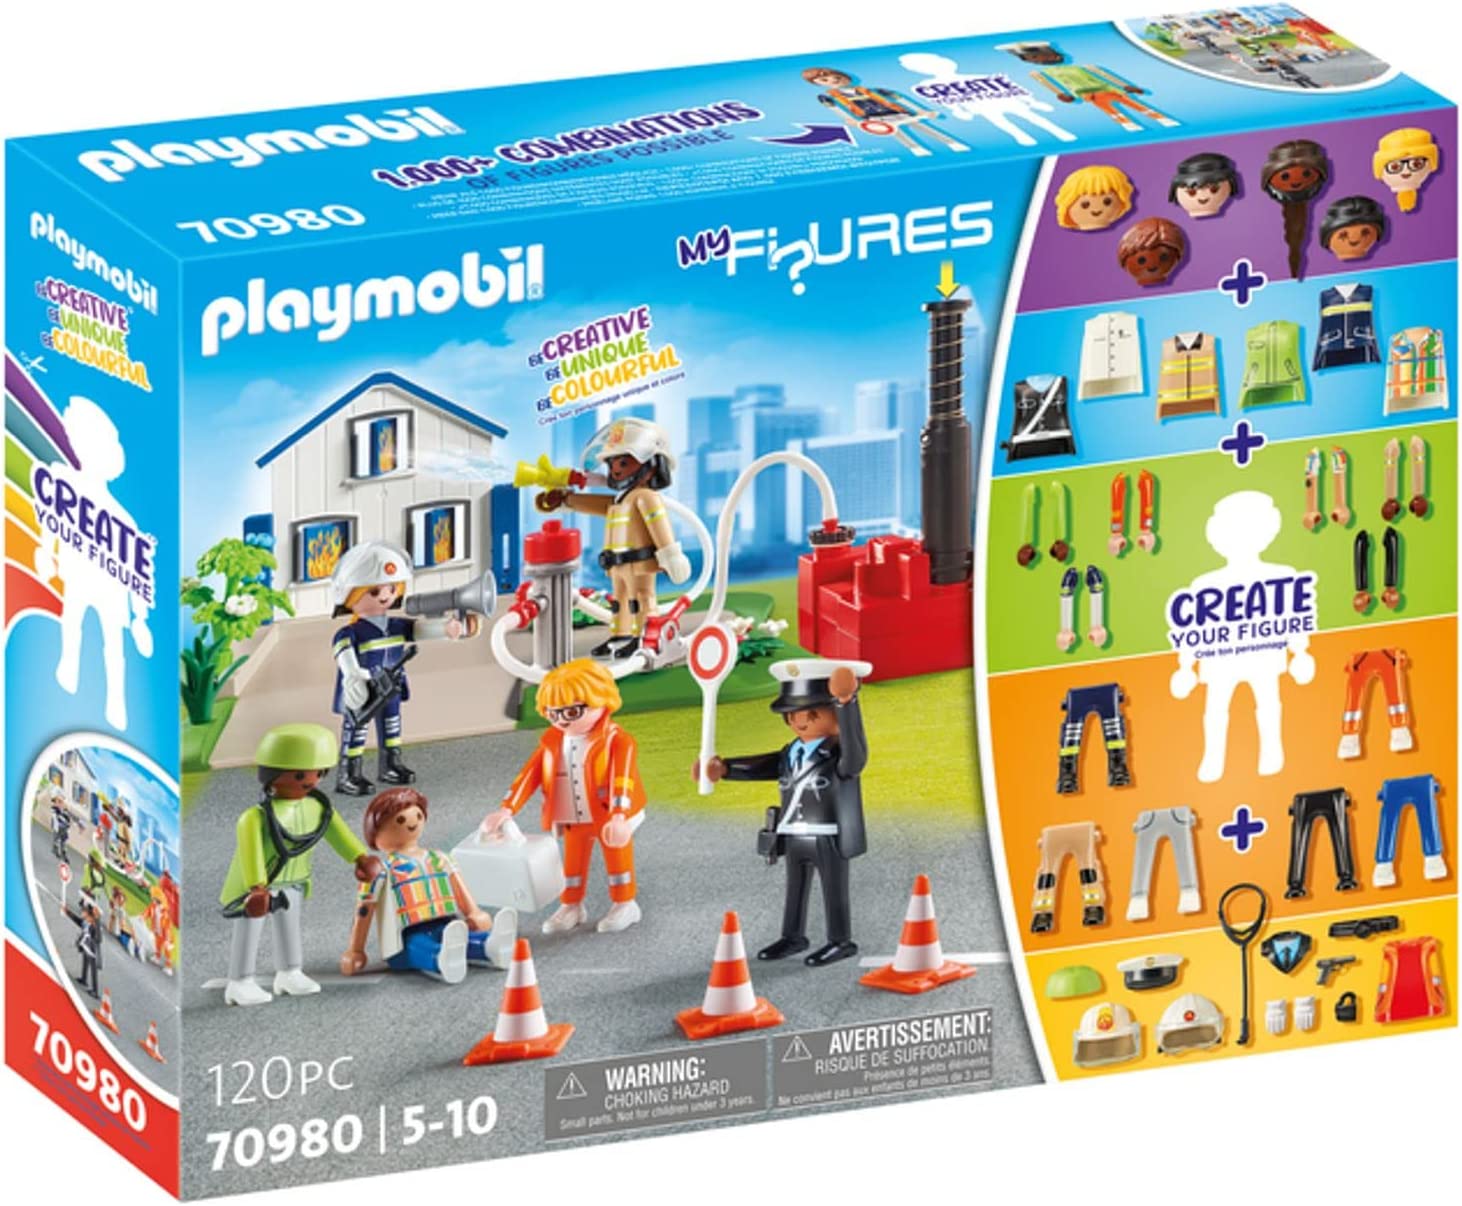 PLAYMOBIL My Figures 70980 Rescue Mission, 6 Toy Figures with Over 1000 Combination Possibilities, Action Toy for Children from 5 Years